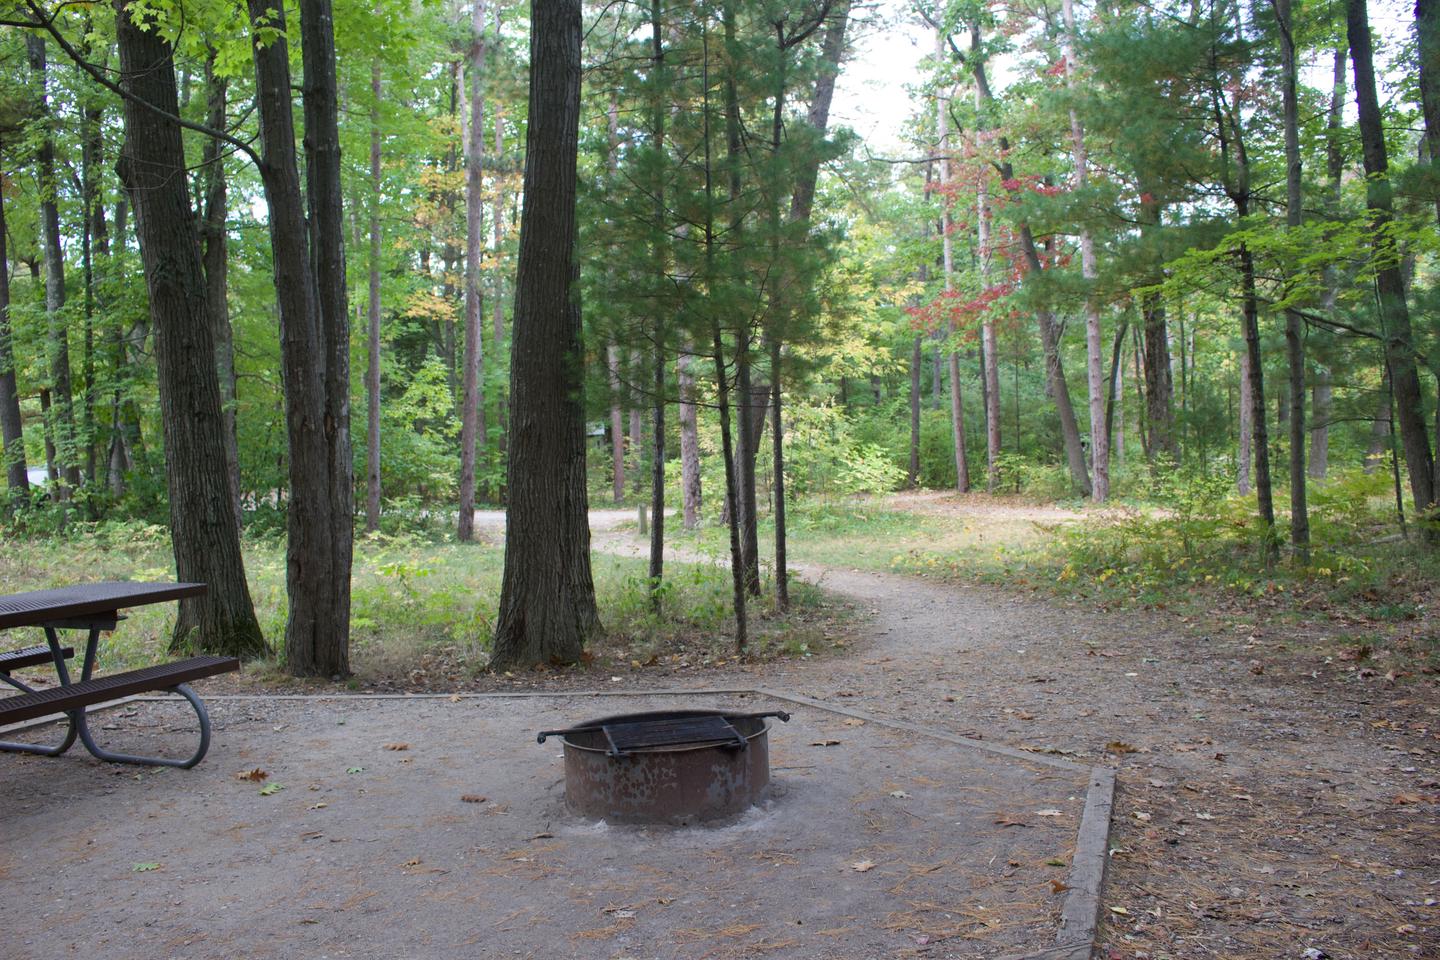 Campsite #18, view from the site toward the road